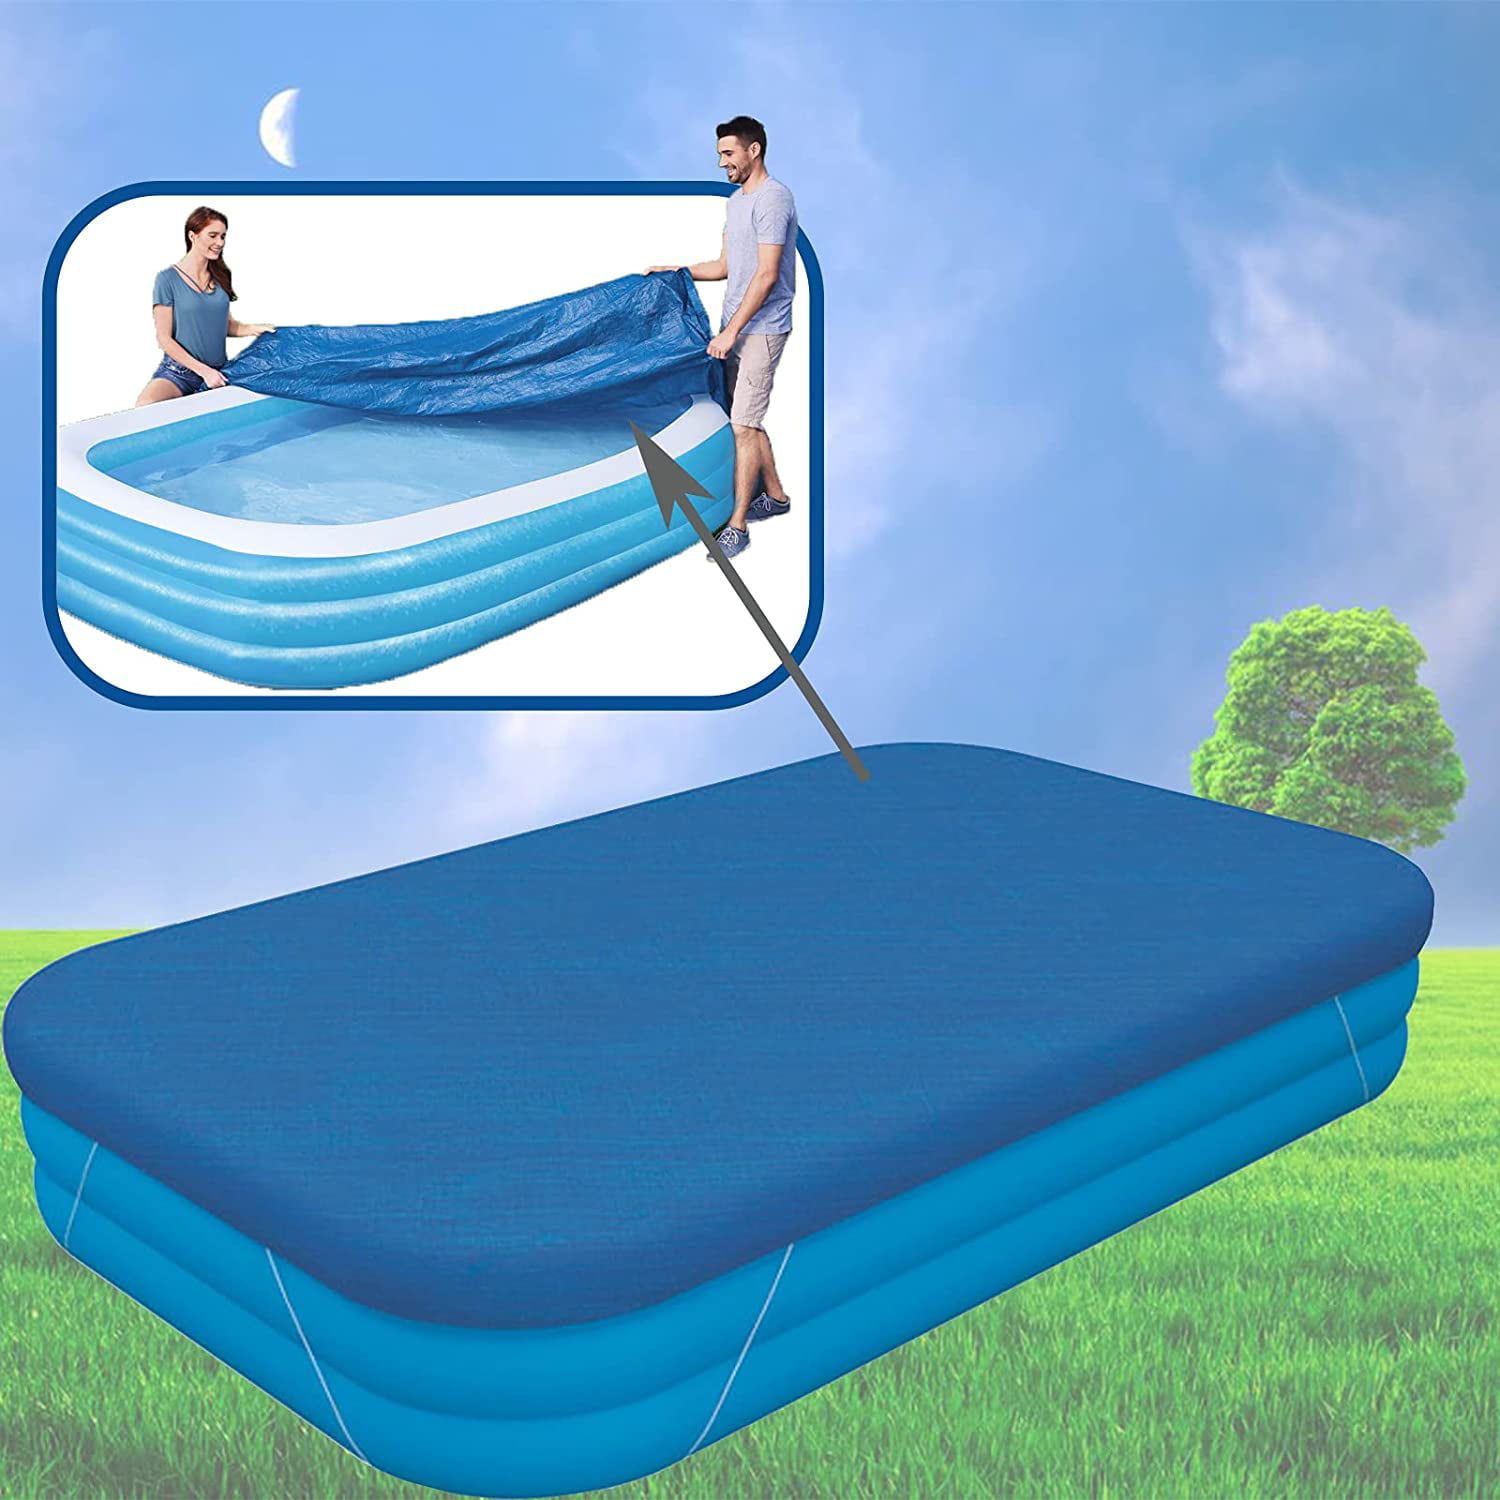 Cobertor Piscina Dust Cover Weather Cover Fast Set Solar Swimming Pool Cover Reusable Rainproof Durable Rectangle Polyester SPA Bath Hot Tub Fish Tank 